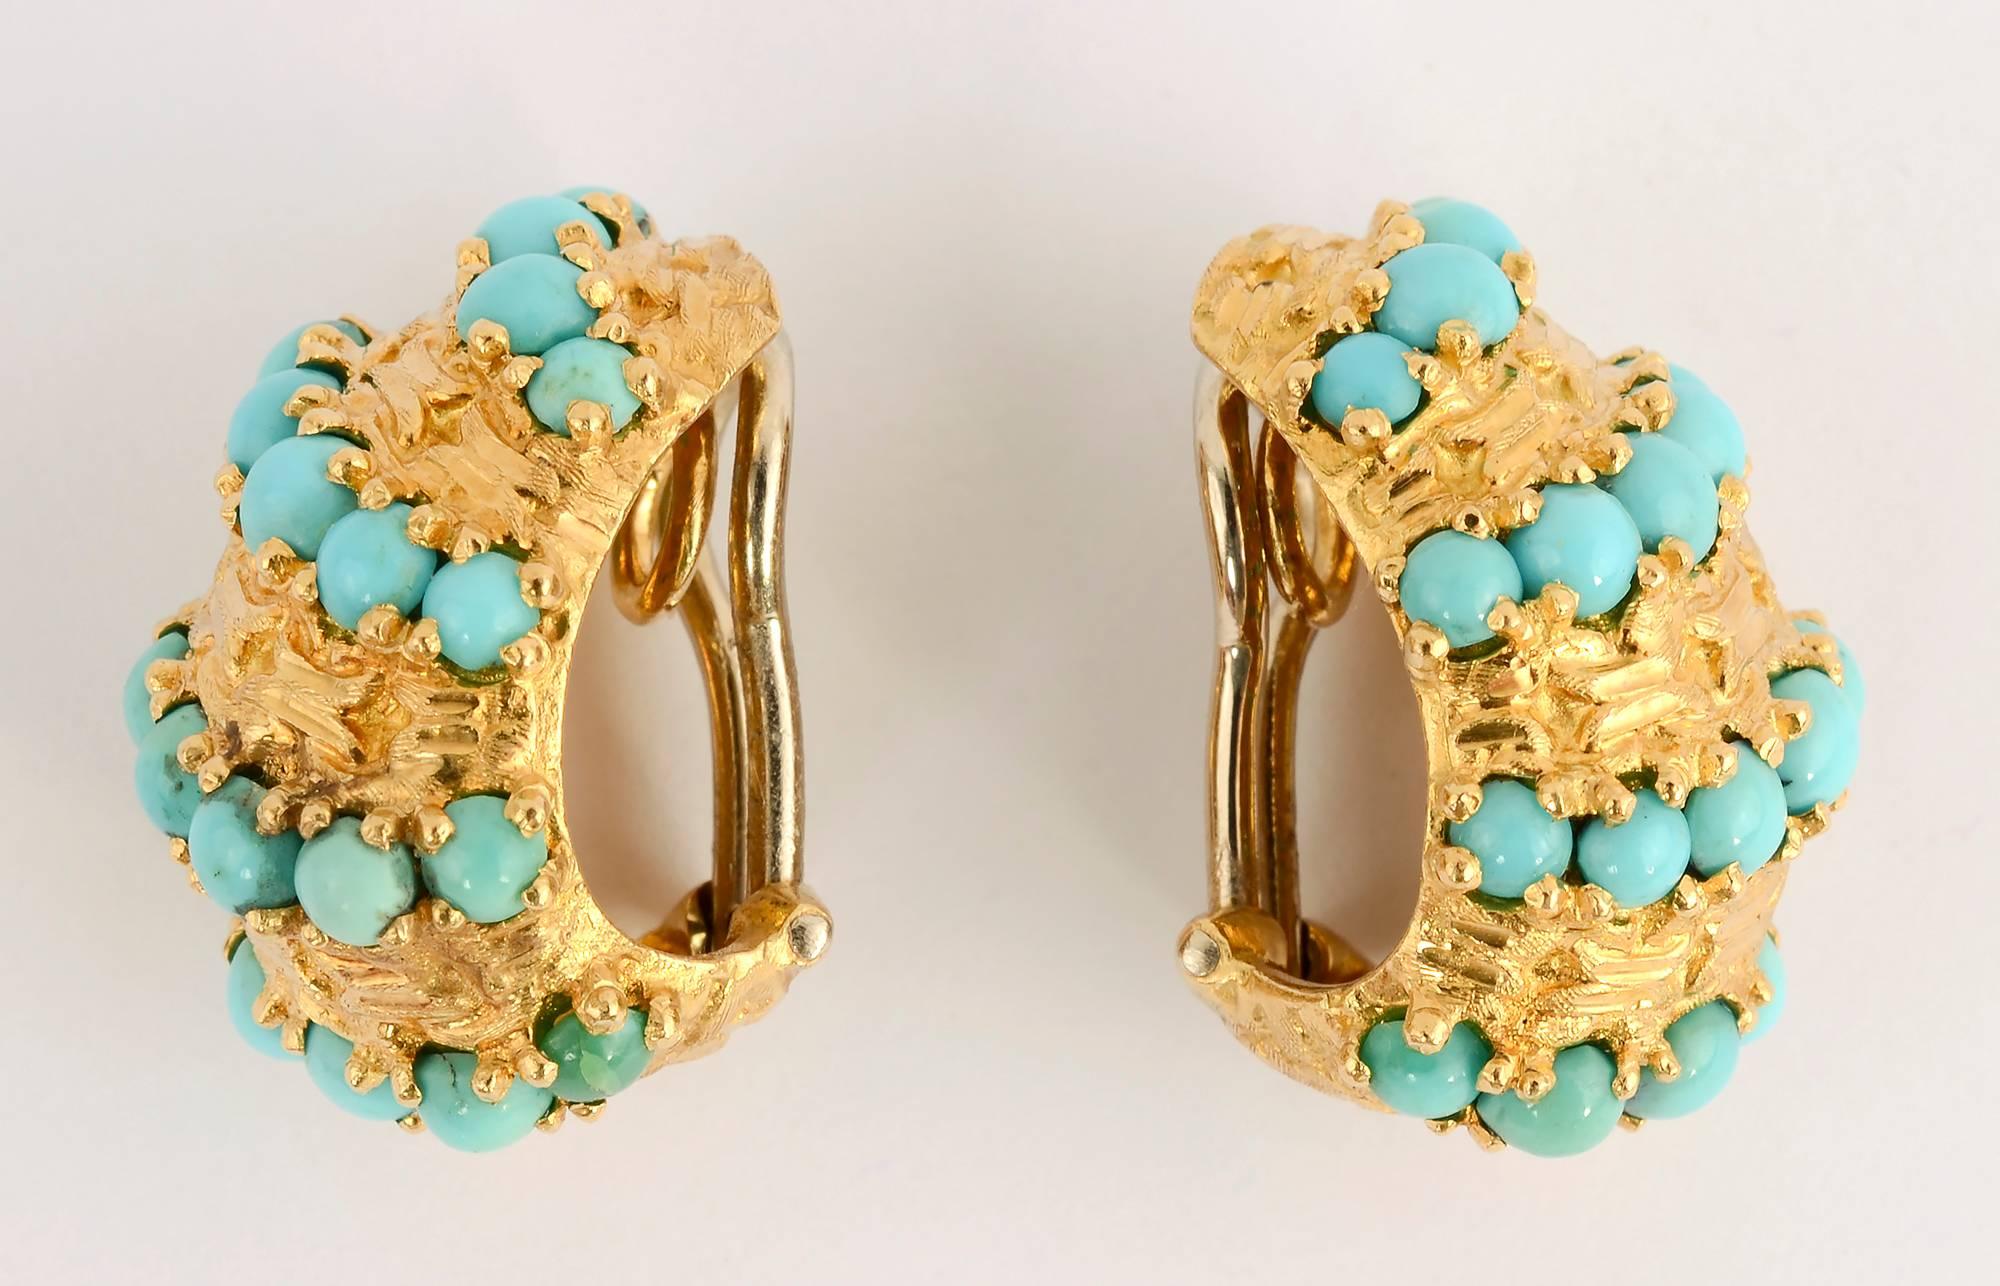 Wonderfully textured half hoop earrings by Pomellato. The swirls of gold are echoed by rows of richly colored oval turquoise stones. The earrings measure 7/8